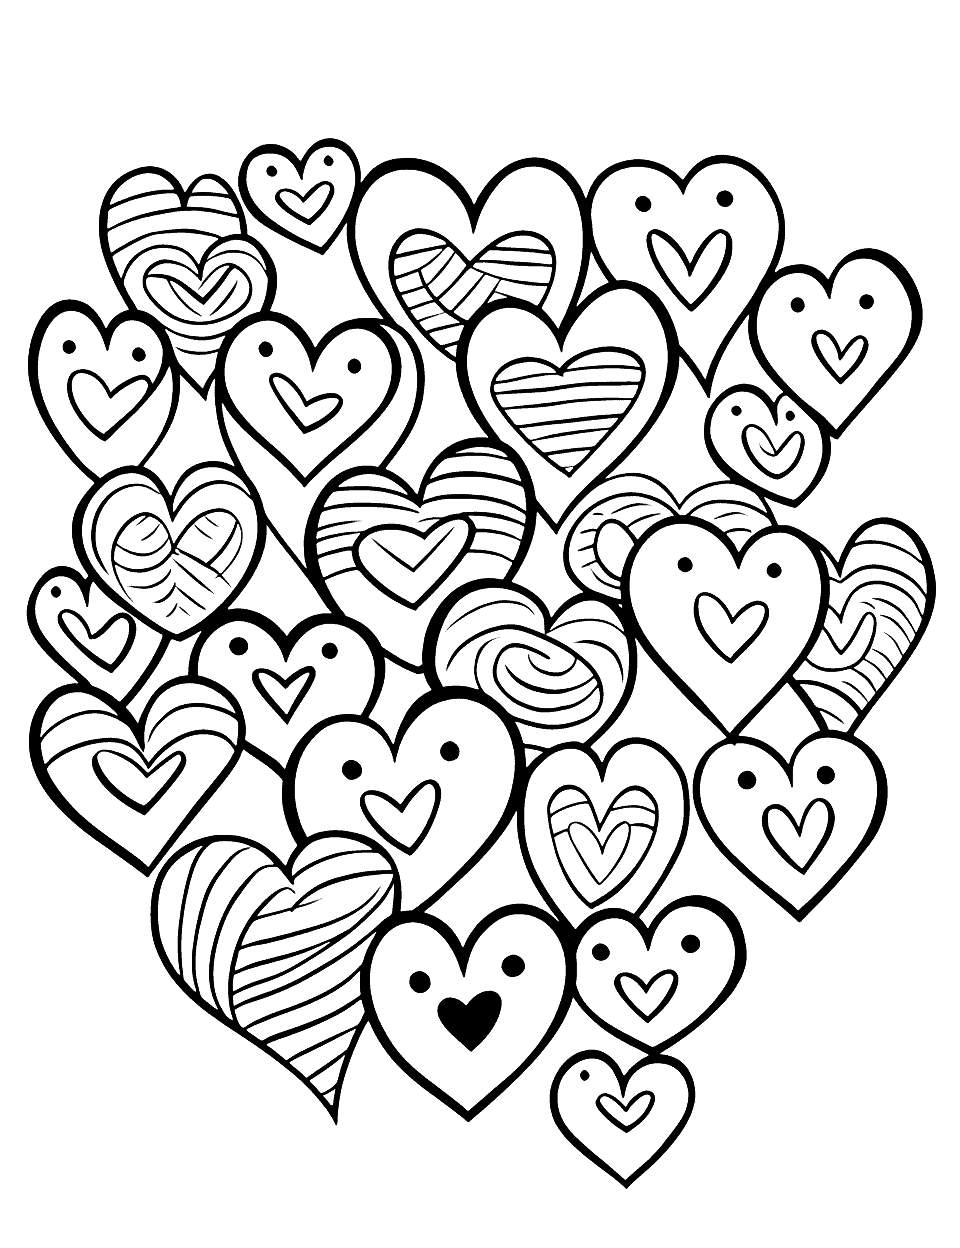 Happy Faces in Hearts Heart Coloring Page - A page filled with hearts that have happy faces inside them.